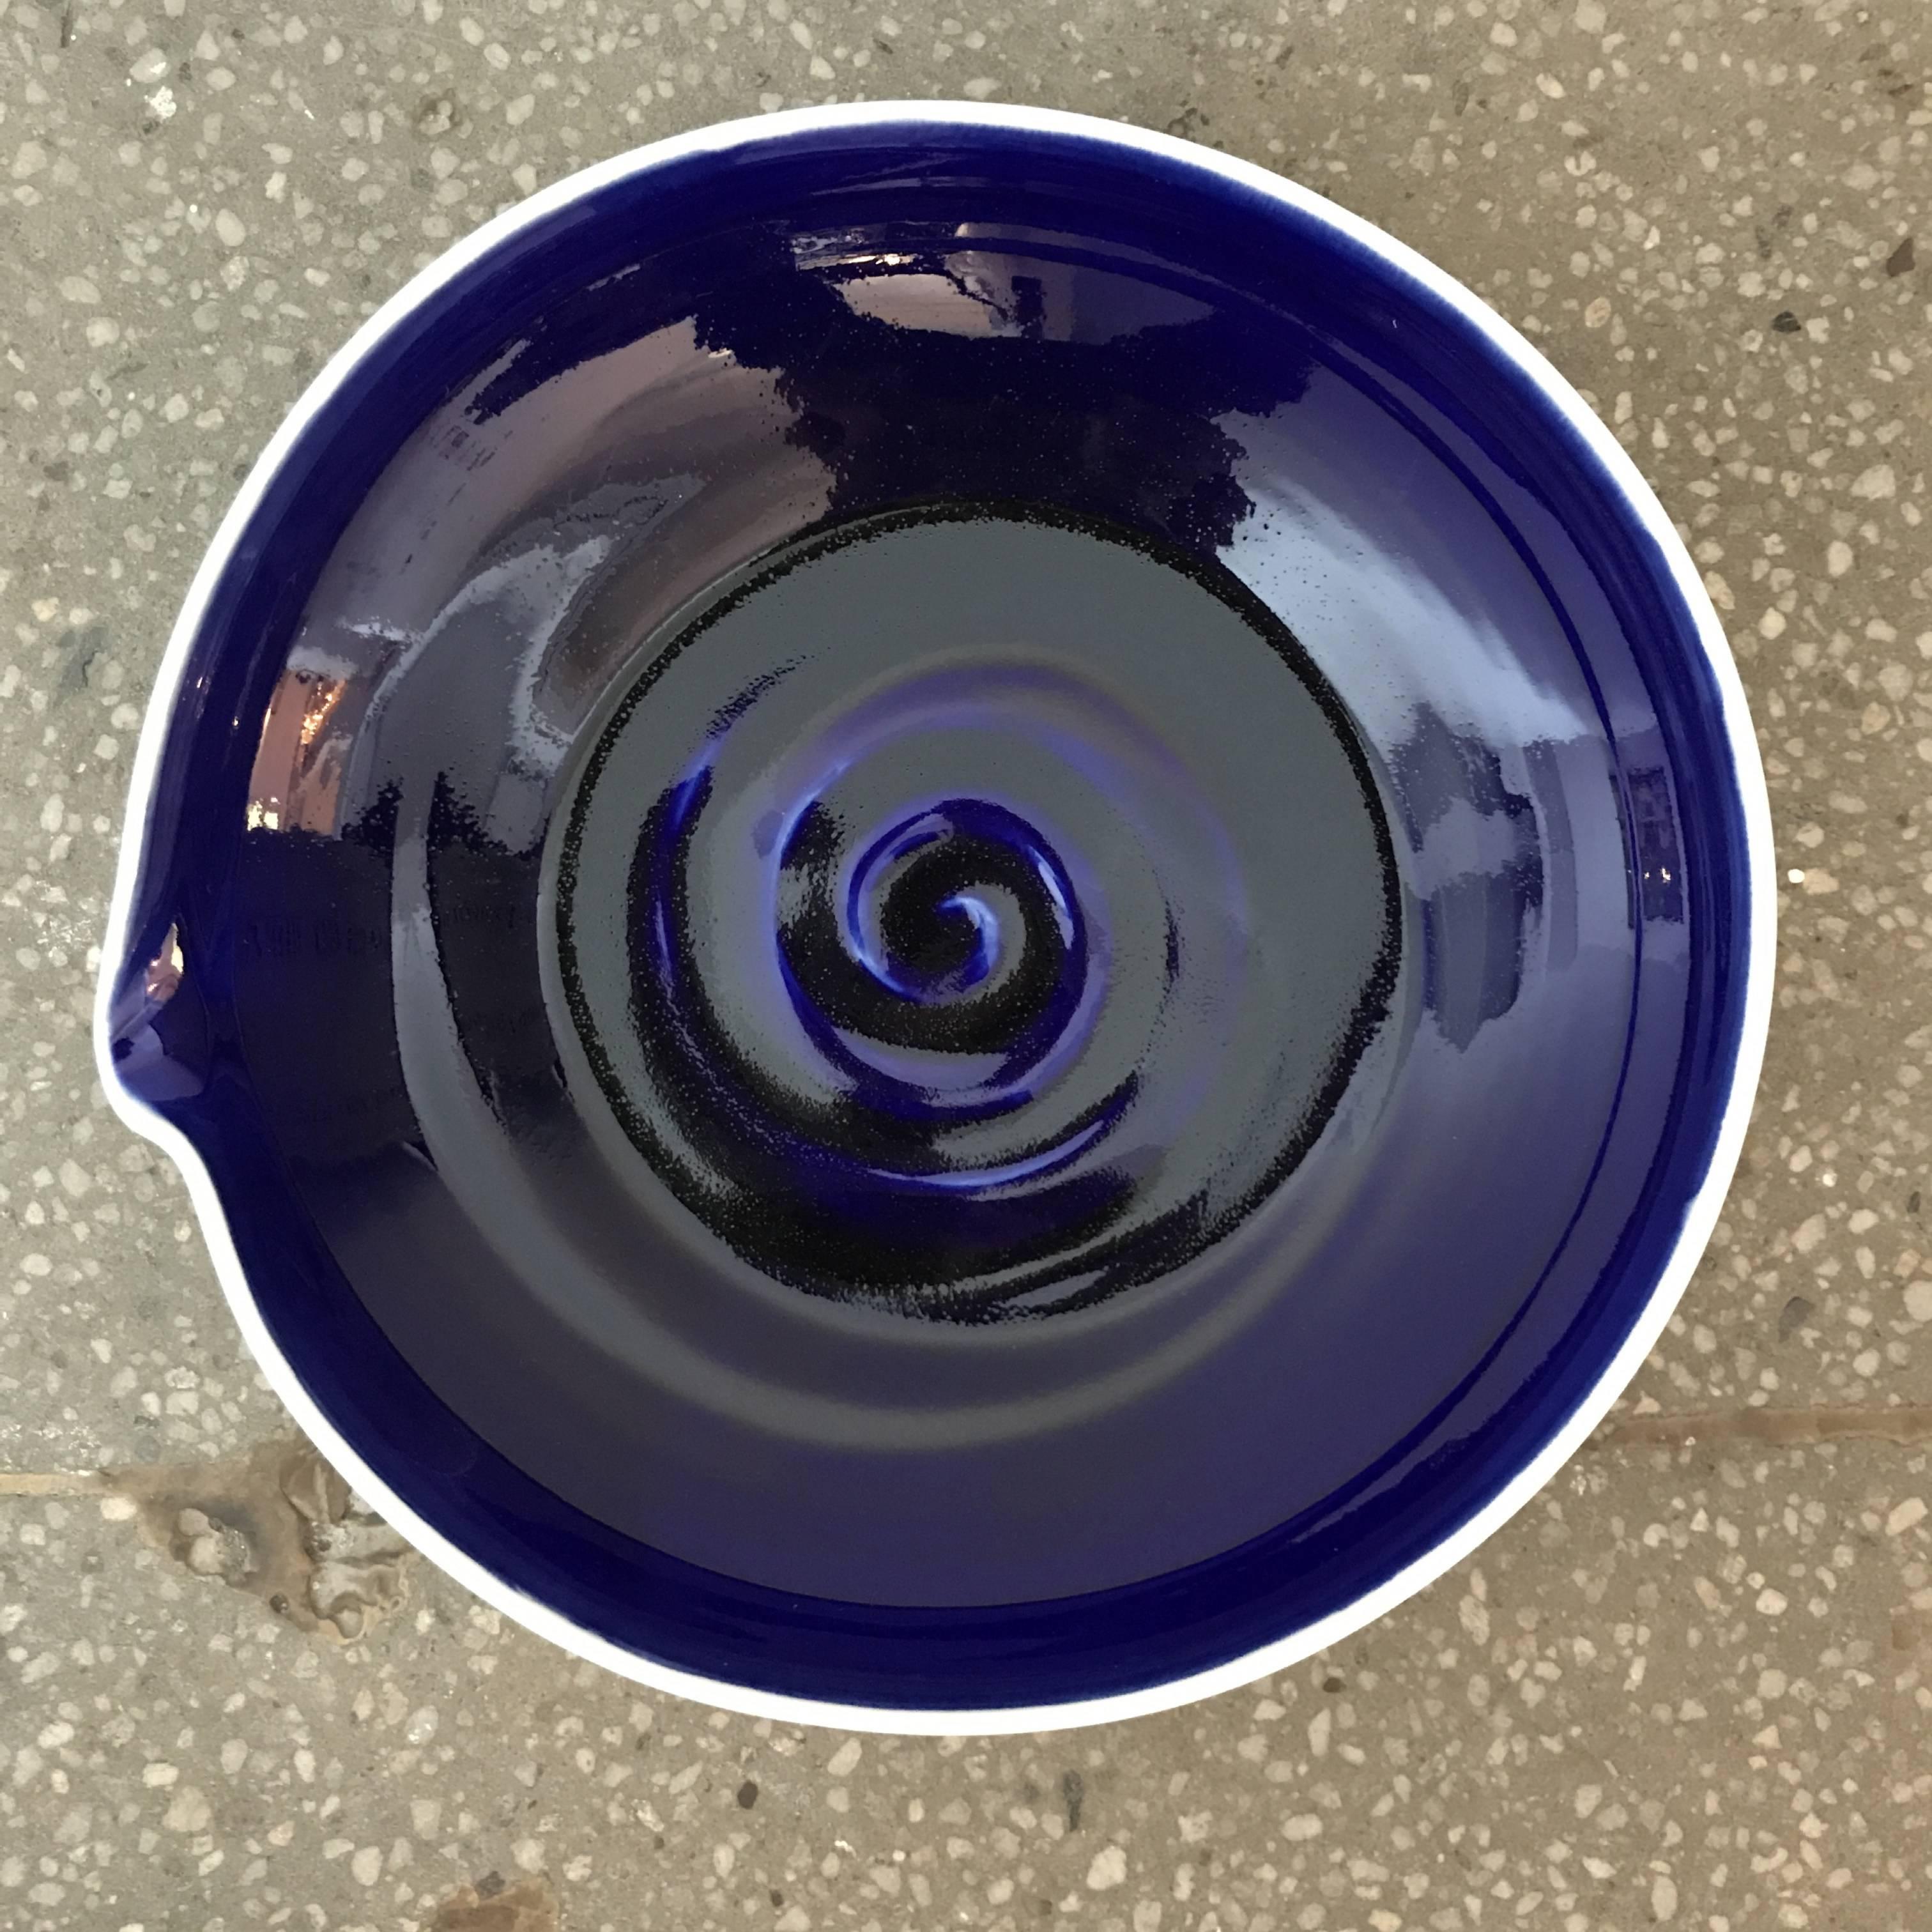 Hand-thrown blue and white ceramic Studio Pottery bowls created by a local artisan in Jaffa Israel.
Indigo blue interior with white exterior. Subtle bend detail on the rim of each bowl. Intricate graphics and artist signature on the bottom.